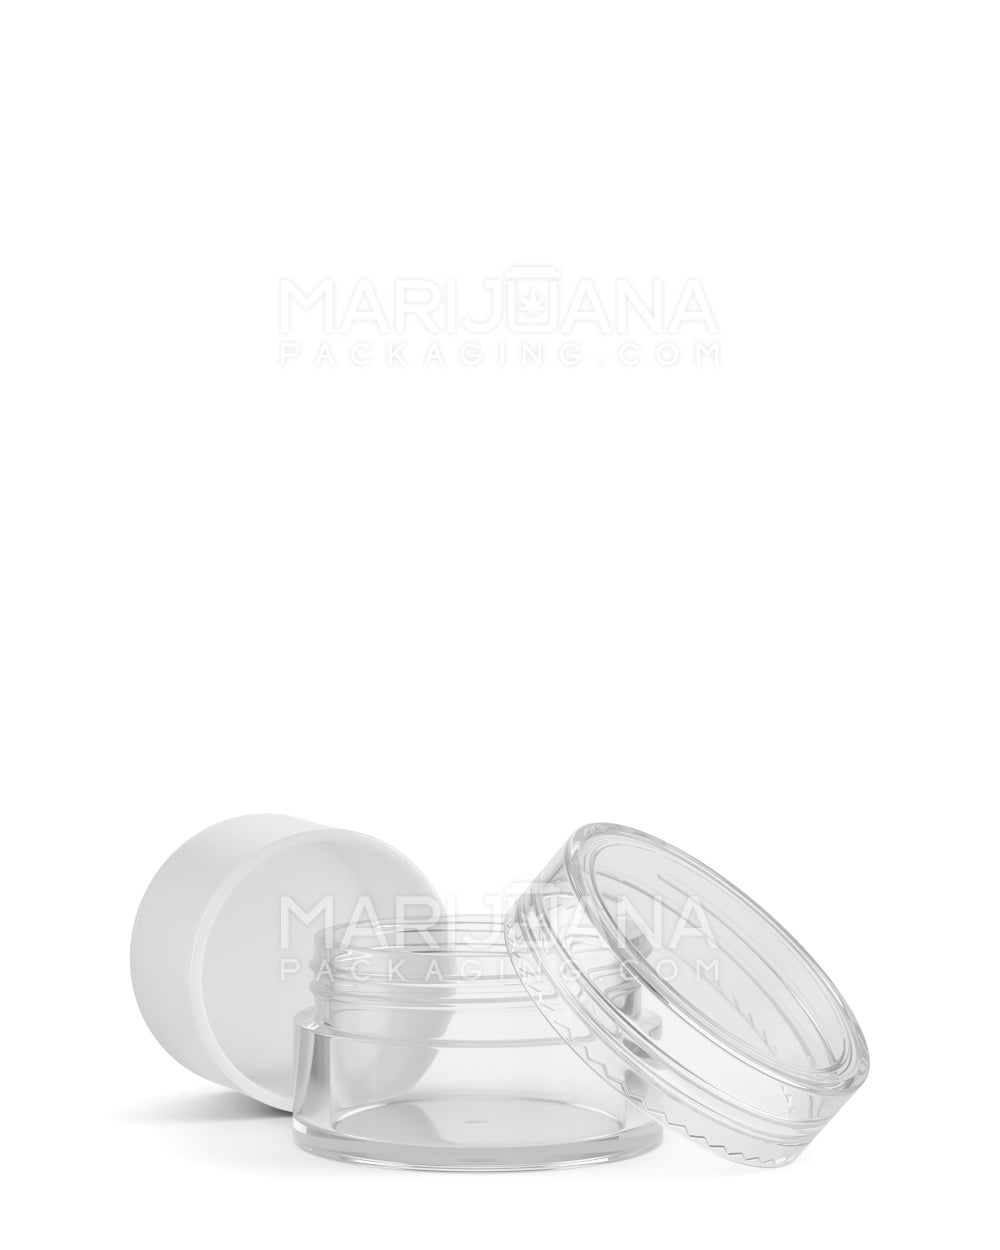 Clear Concentrate Containers w/ Screw Top Cap & White Silicone Insert | 7mL - Plastic | Sample - 4